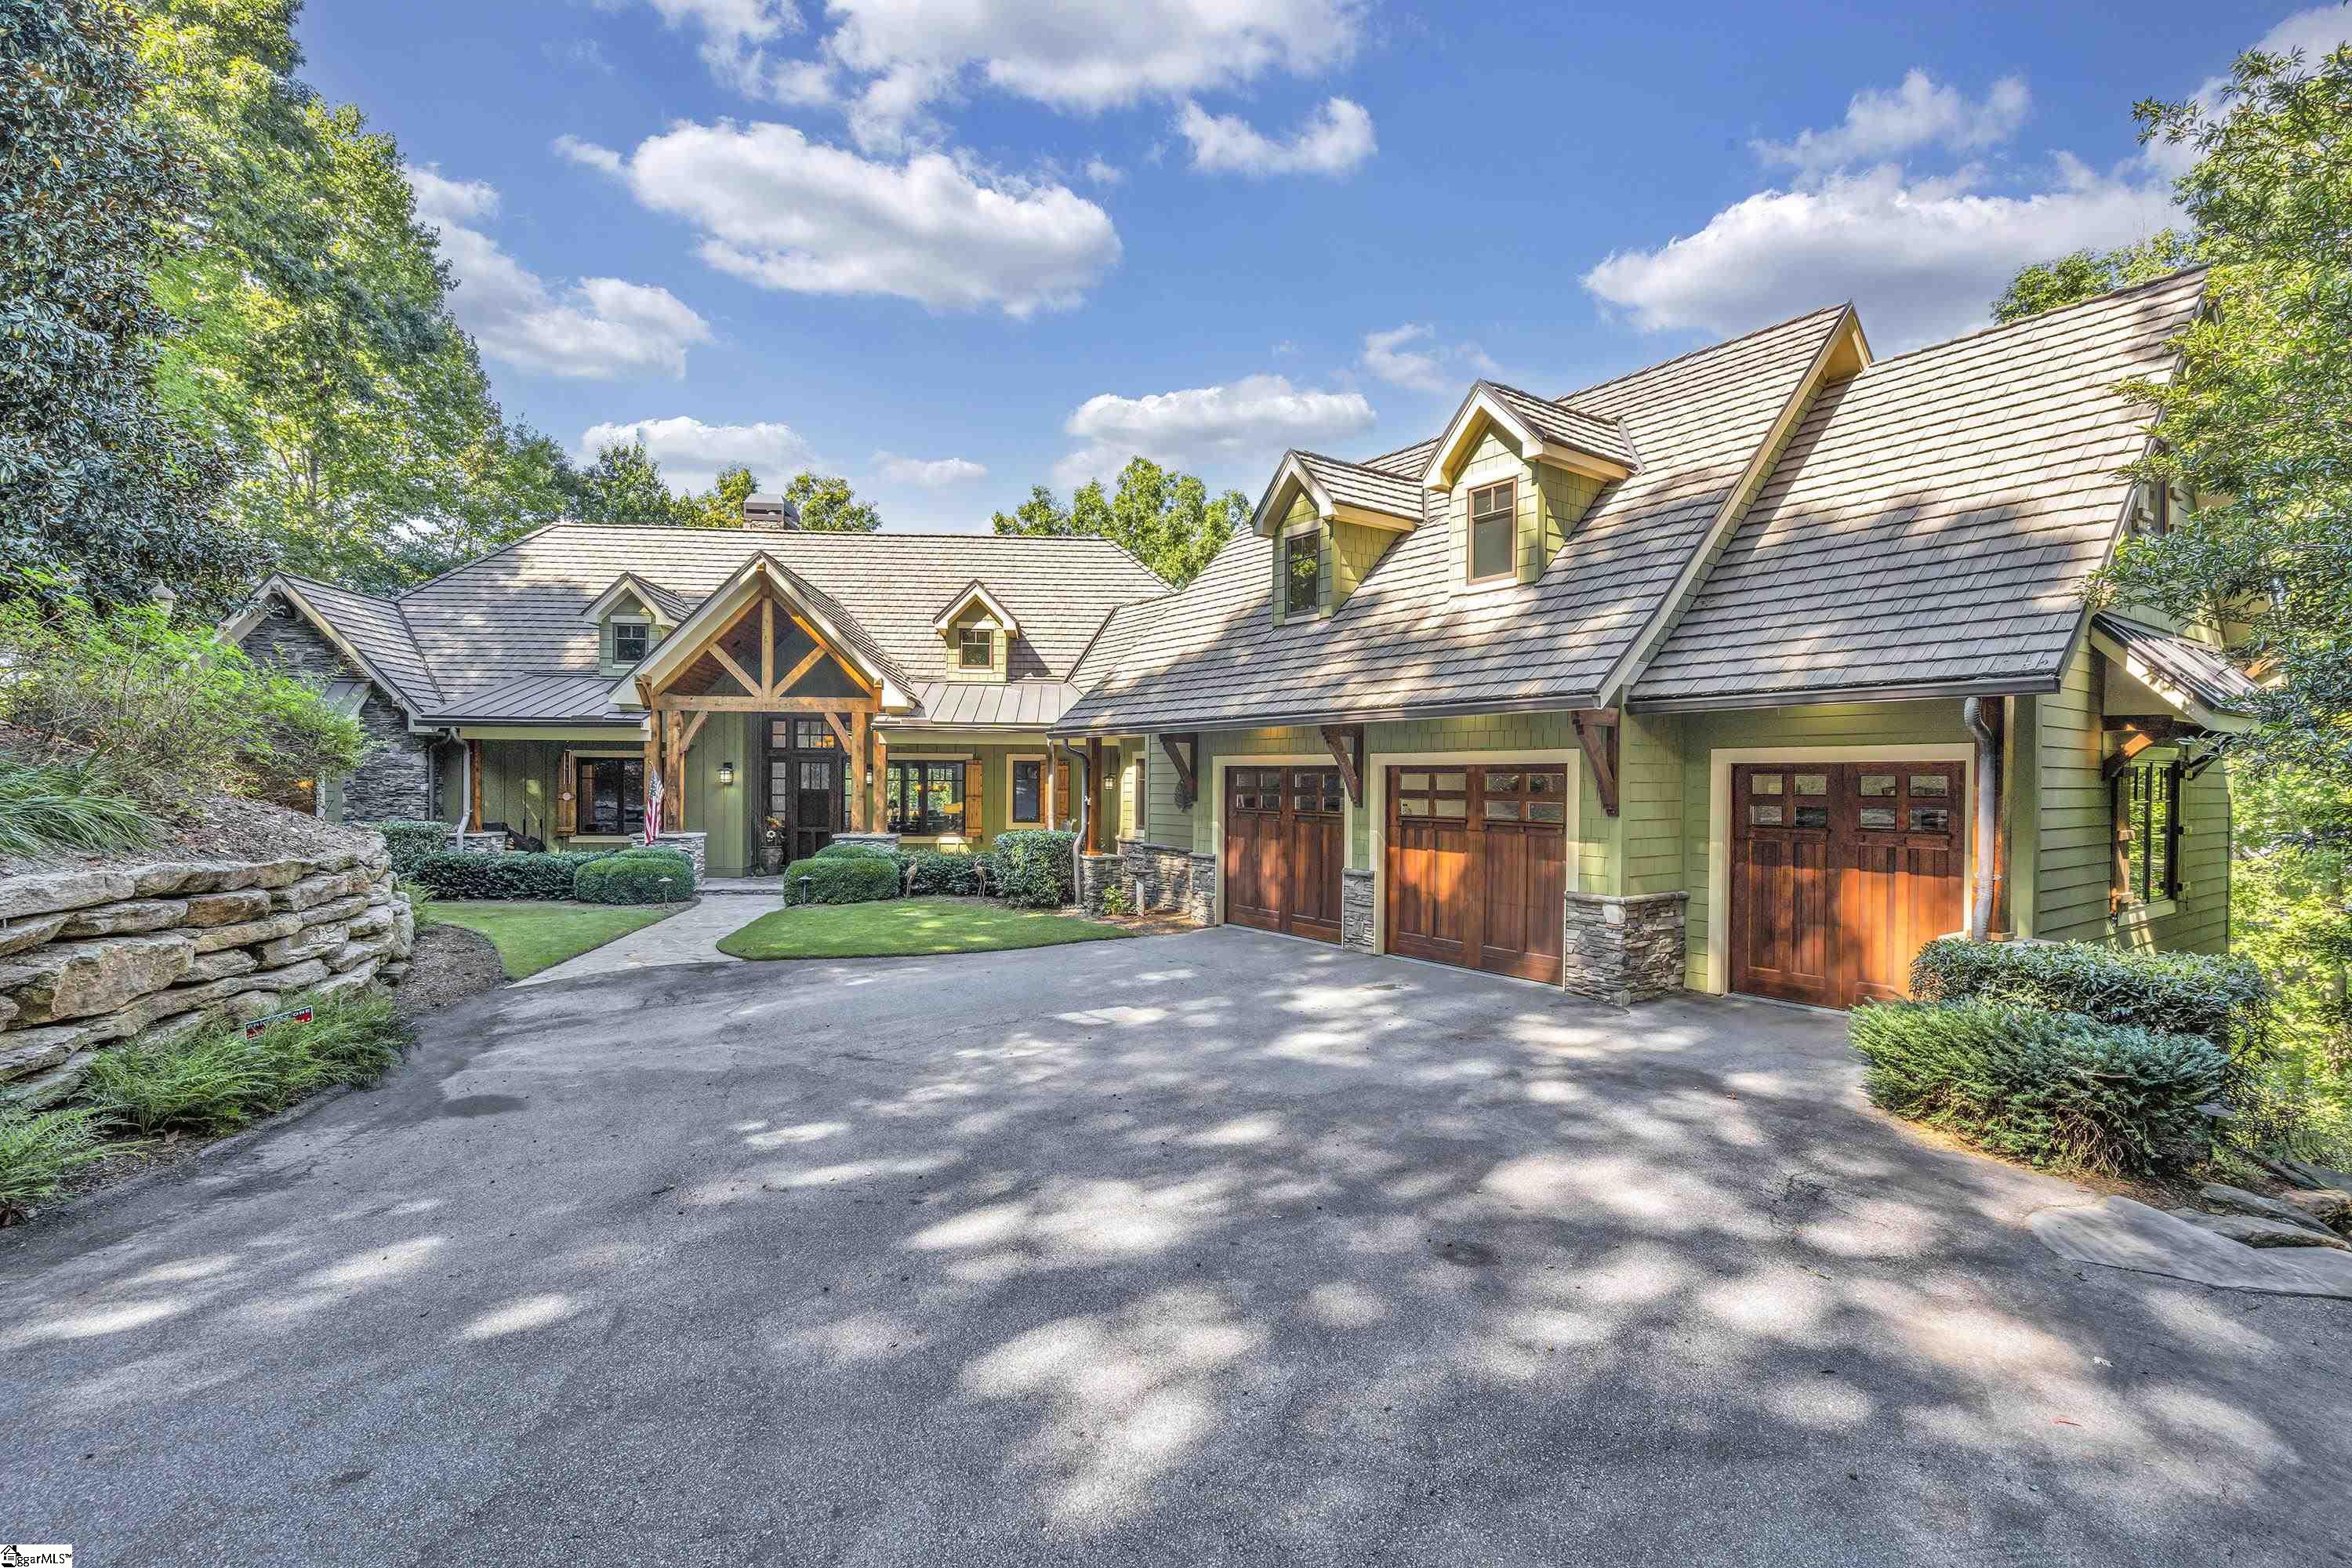 This custom lakefront home, with superior craftsmanship from Jeff Holder Builders, is located within the Founders section of the spectacular Reserve at Lake Keowee. Ideally situated in a private cul-de-sac on .85 acres, it offers both seclusion and convenient proximity to hiking trails, conservation lands, and Turkey Ridge Park. Spacious rooms and extensive outdoor decking and porches have been brilliantly designed to maximize your view of the distant mountains, a protected island to the west, and of course, the sparkling open water. The home boats 5,460 finished square feet, along with another 931 sf of partially finished space—and 2,471 sf of porch and deck space! The exterior features a thoughtful blend of natural stacked stone, board and batten, maintenance free-hardie board siding and solid rough sawn beams. Also a fire resistant tile roof. The nine-foot solid wood entry door with sidelights and transom sets the tone of a welcoming mountain retreat as you step into a vaulted great room and an expansive open floor plan. Hickory flooring throughout the main level contrasts beautifully with massive columns that make the space distinctive. The great room features a wood-burning fireplace, a built-in entertainment center, striking woodwork, ample cabinetry, and expertly crafted windows to display the view beyond them. The chef’s kitchen is complete with oversized custom knotty Alder cabinets, Wolf double ovens, a Sub-Zero refrigerator, and a GE Profile Induction range. The amount of rich looking wood gives the room a hint of a midcentury feel, but this noteworthy kitchen is both inviting and a practical workspace for the serious chef or entertainer. Close by is a dream pantry—massive in size, with a variety of built-in solid Alder shelving, plus a full-size freezer. Just off the kitchen is a vaulted screened porch with a stacked stone fireplace and a grilling area perfect for fall football games. The large dining area is well positioned between the great room and the kitchen with access to both the sun deck and porch. The master suite on the main level has its own private “sleeping porch,” plus a separate reading or yoga room, and there is an office/second bedroom on the main level with a full bath, convenient to the master. The home has a generously sized three-car garage, and the huge bonus room above it would be perfect for an exercise room or another bedroom. The home has two private ensuites on the lower level. The family room there has a coffered ceiling, a fireplace, a wet bar, and appliances, making it already suited for your first guests. The large lower-level deck is prewired for a hot tub and/or outdoor shower. It leads to a landscaped path with boulder steps and onto a Reserve standard custom dock with a boat lift and EZ-step ladder. The shoreline features 233 feet of rip-rapped frontage. Other features include a whole house generator, solid IPE wood decking and porches, concrete shingle roof tiles, a central vacuum system, and a security system. The Reserve at Lake Keowee is a master-planned community that features over $100 million in amenities including a Jack Nicklaus Signature Golf Course, a lakeside resort-style pool and cabanas, and a marina offering both slips and boat rentals. Premier membership ($72,000) is required with purchase.